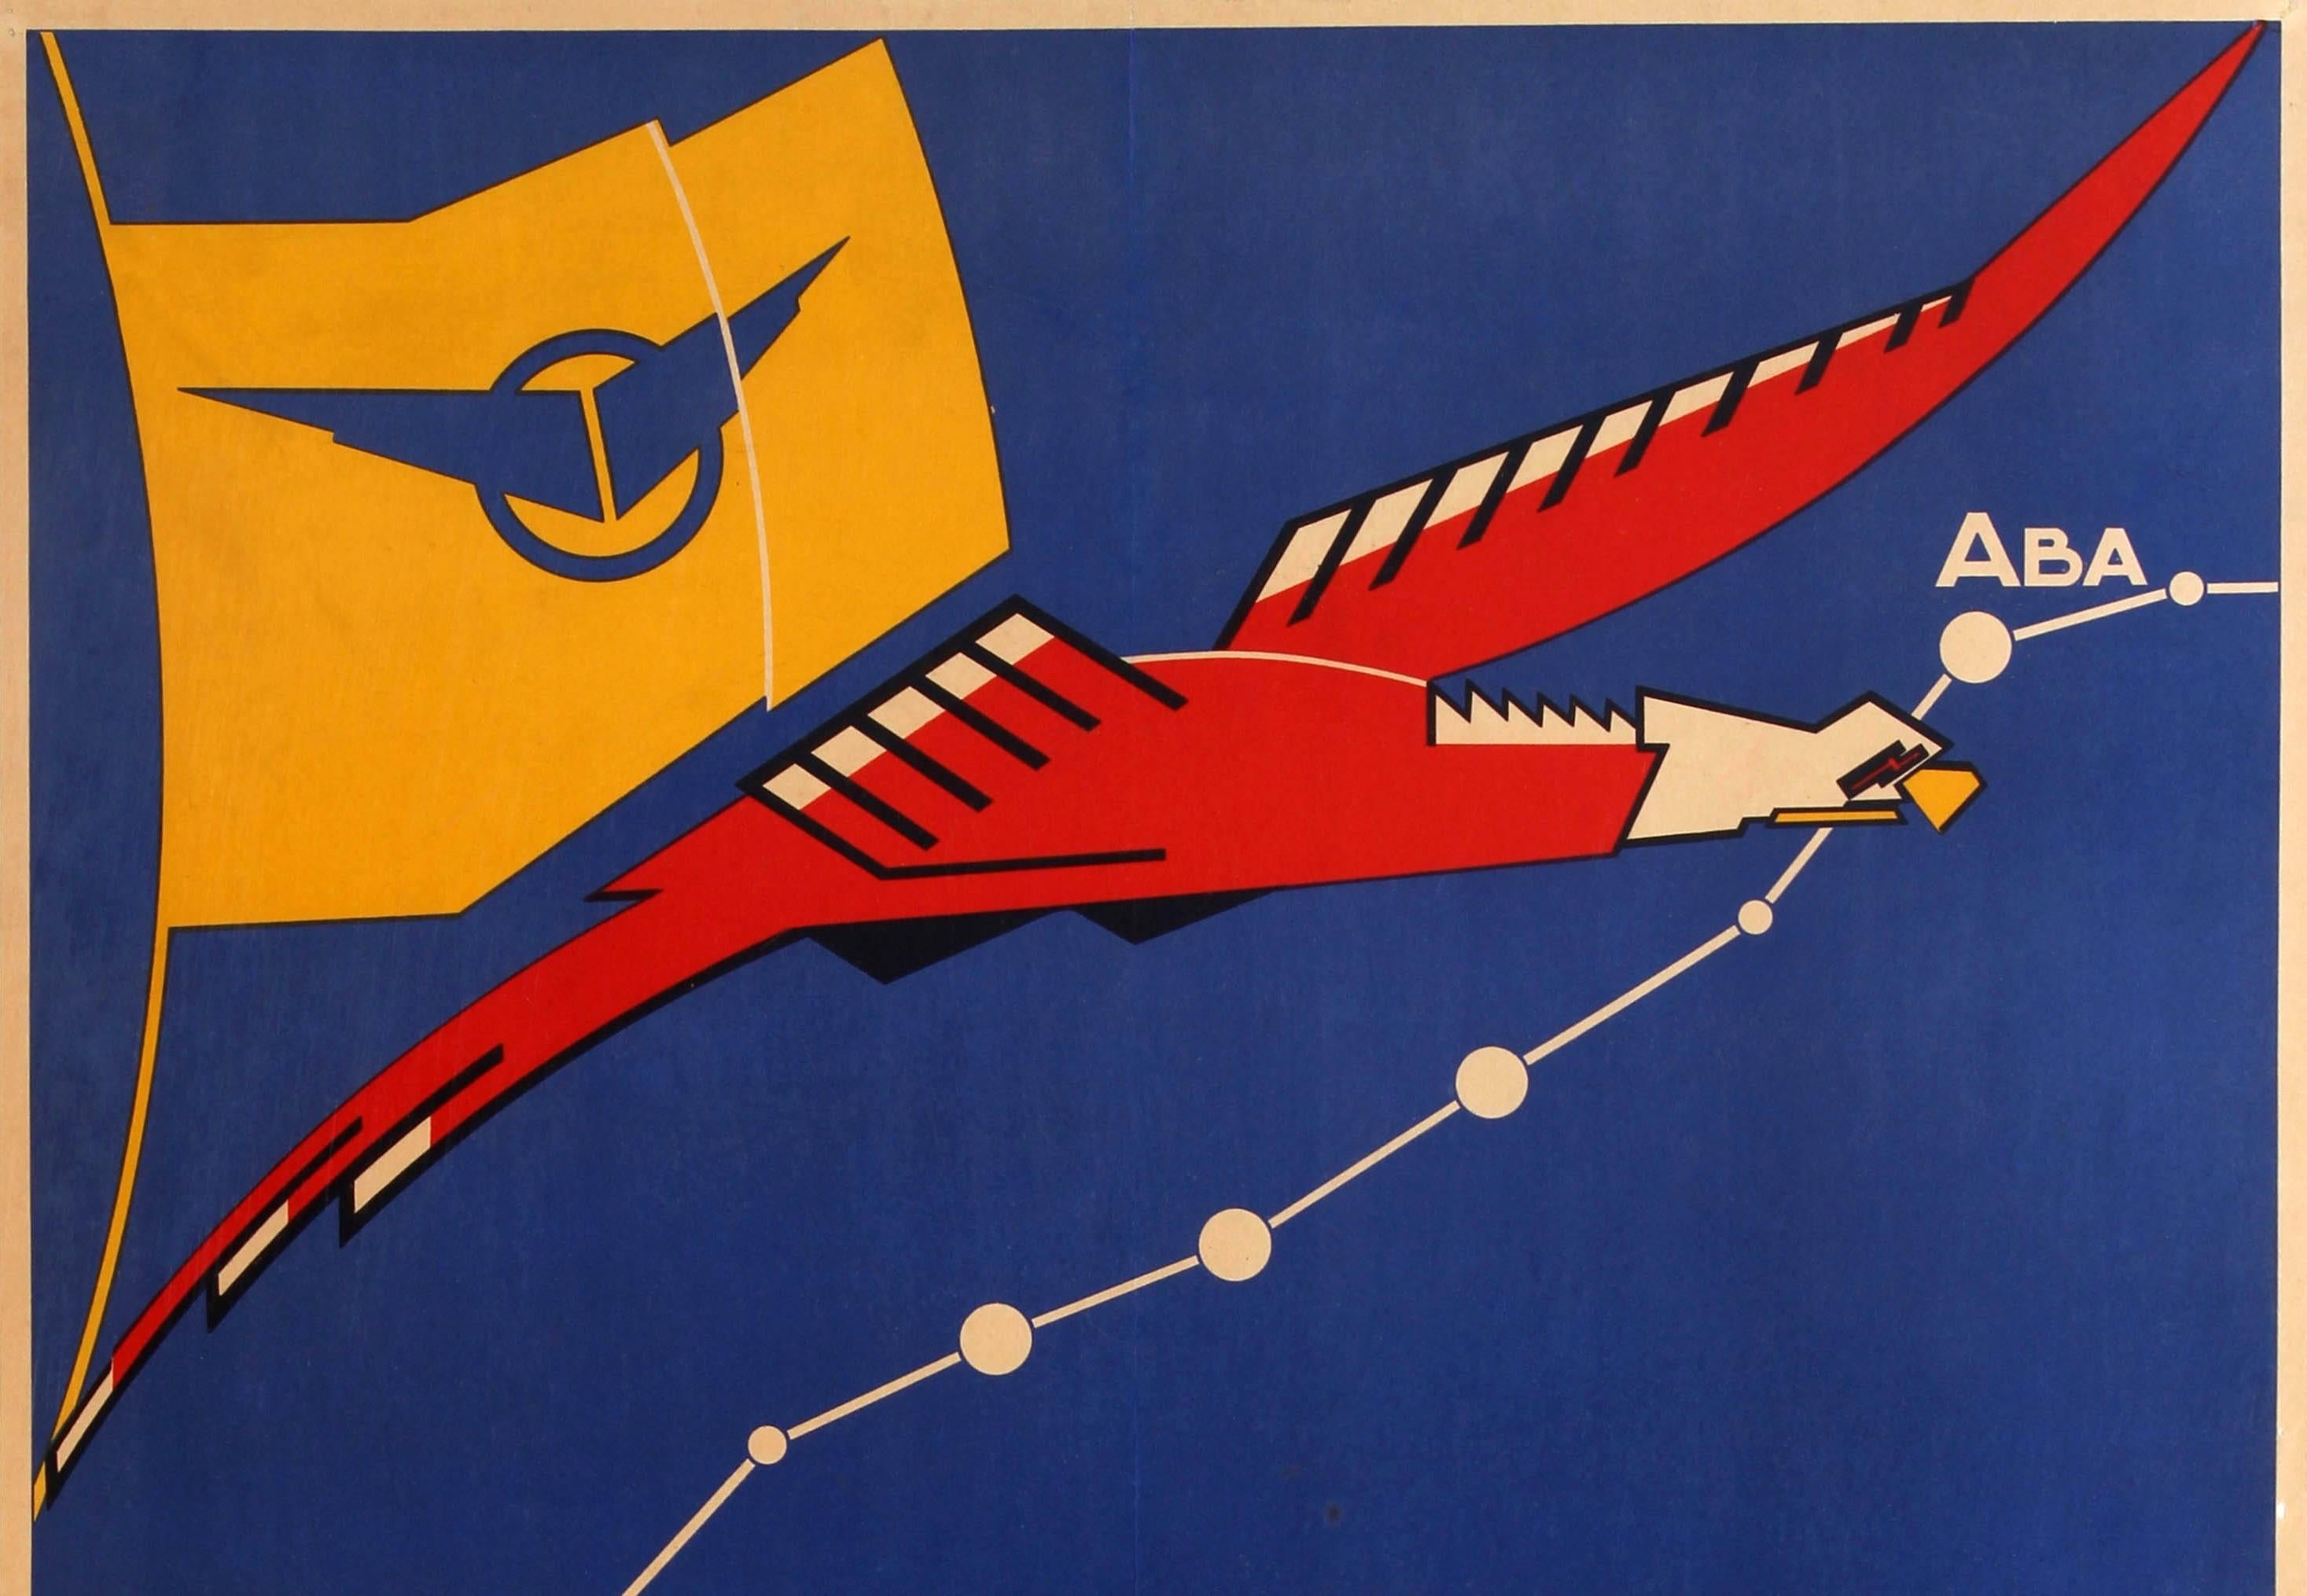 Original vintage advertising poster for the North East Congolese Aeronautic Association in Central Africa / Association Aeronautique du Nord-Est Congolais featuring a colorful Art Deco design showing a route line in white against the blue background